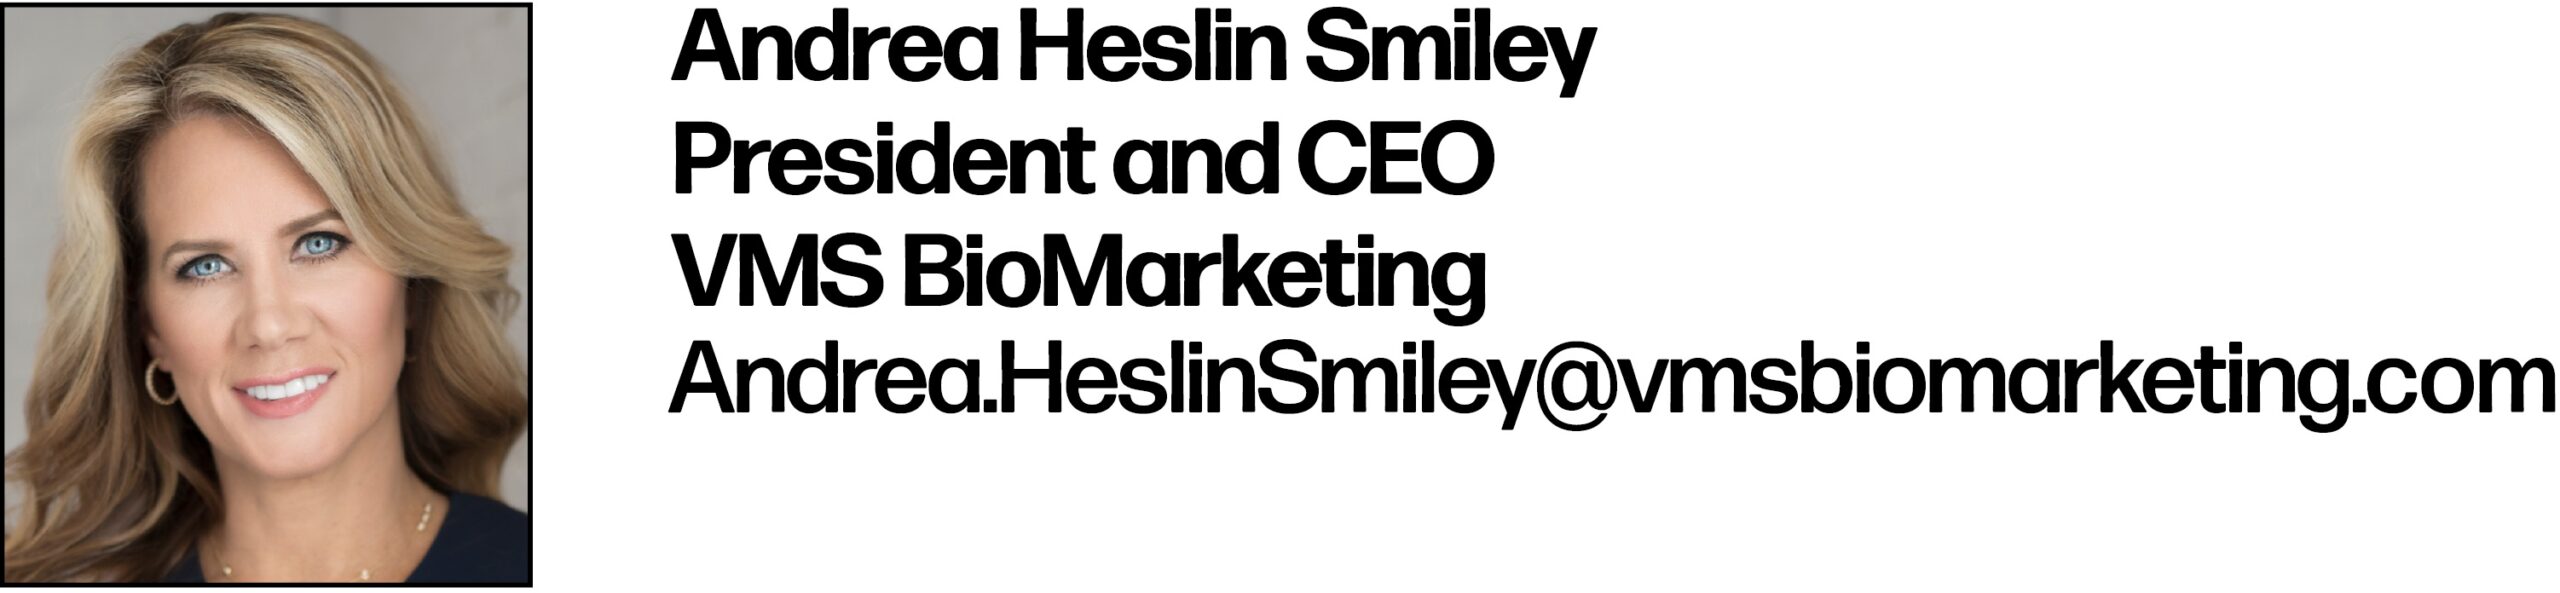 Andrea Heslin Smiley
President and CEO
VMS BioMarketing 
Andrea.HeslinSmiley@vmsbiomarketing.com 